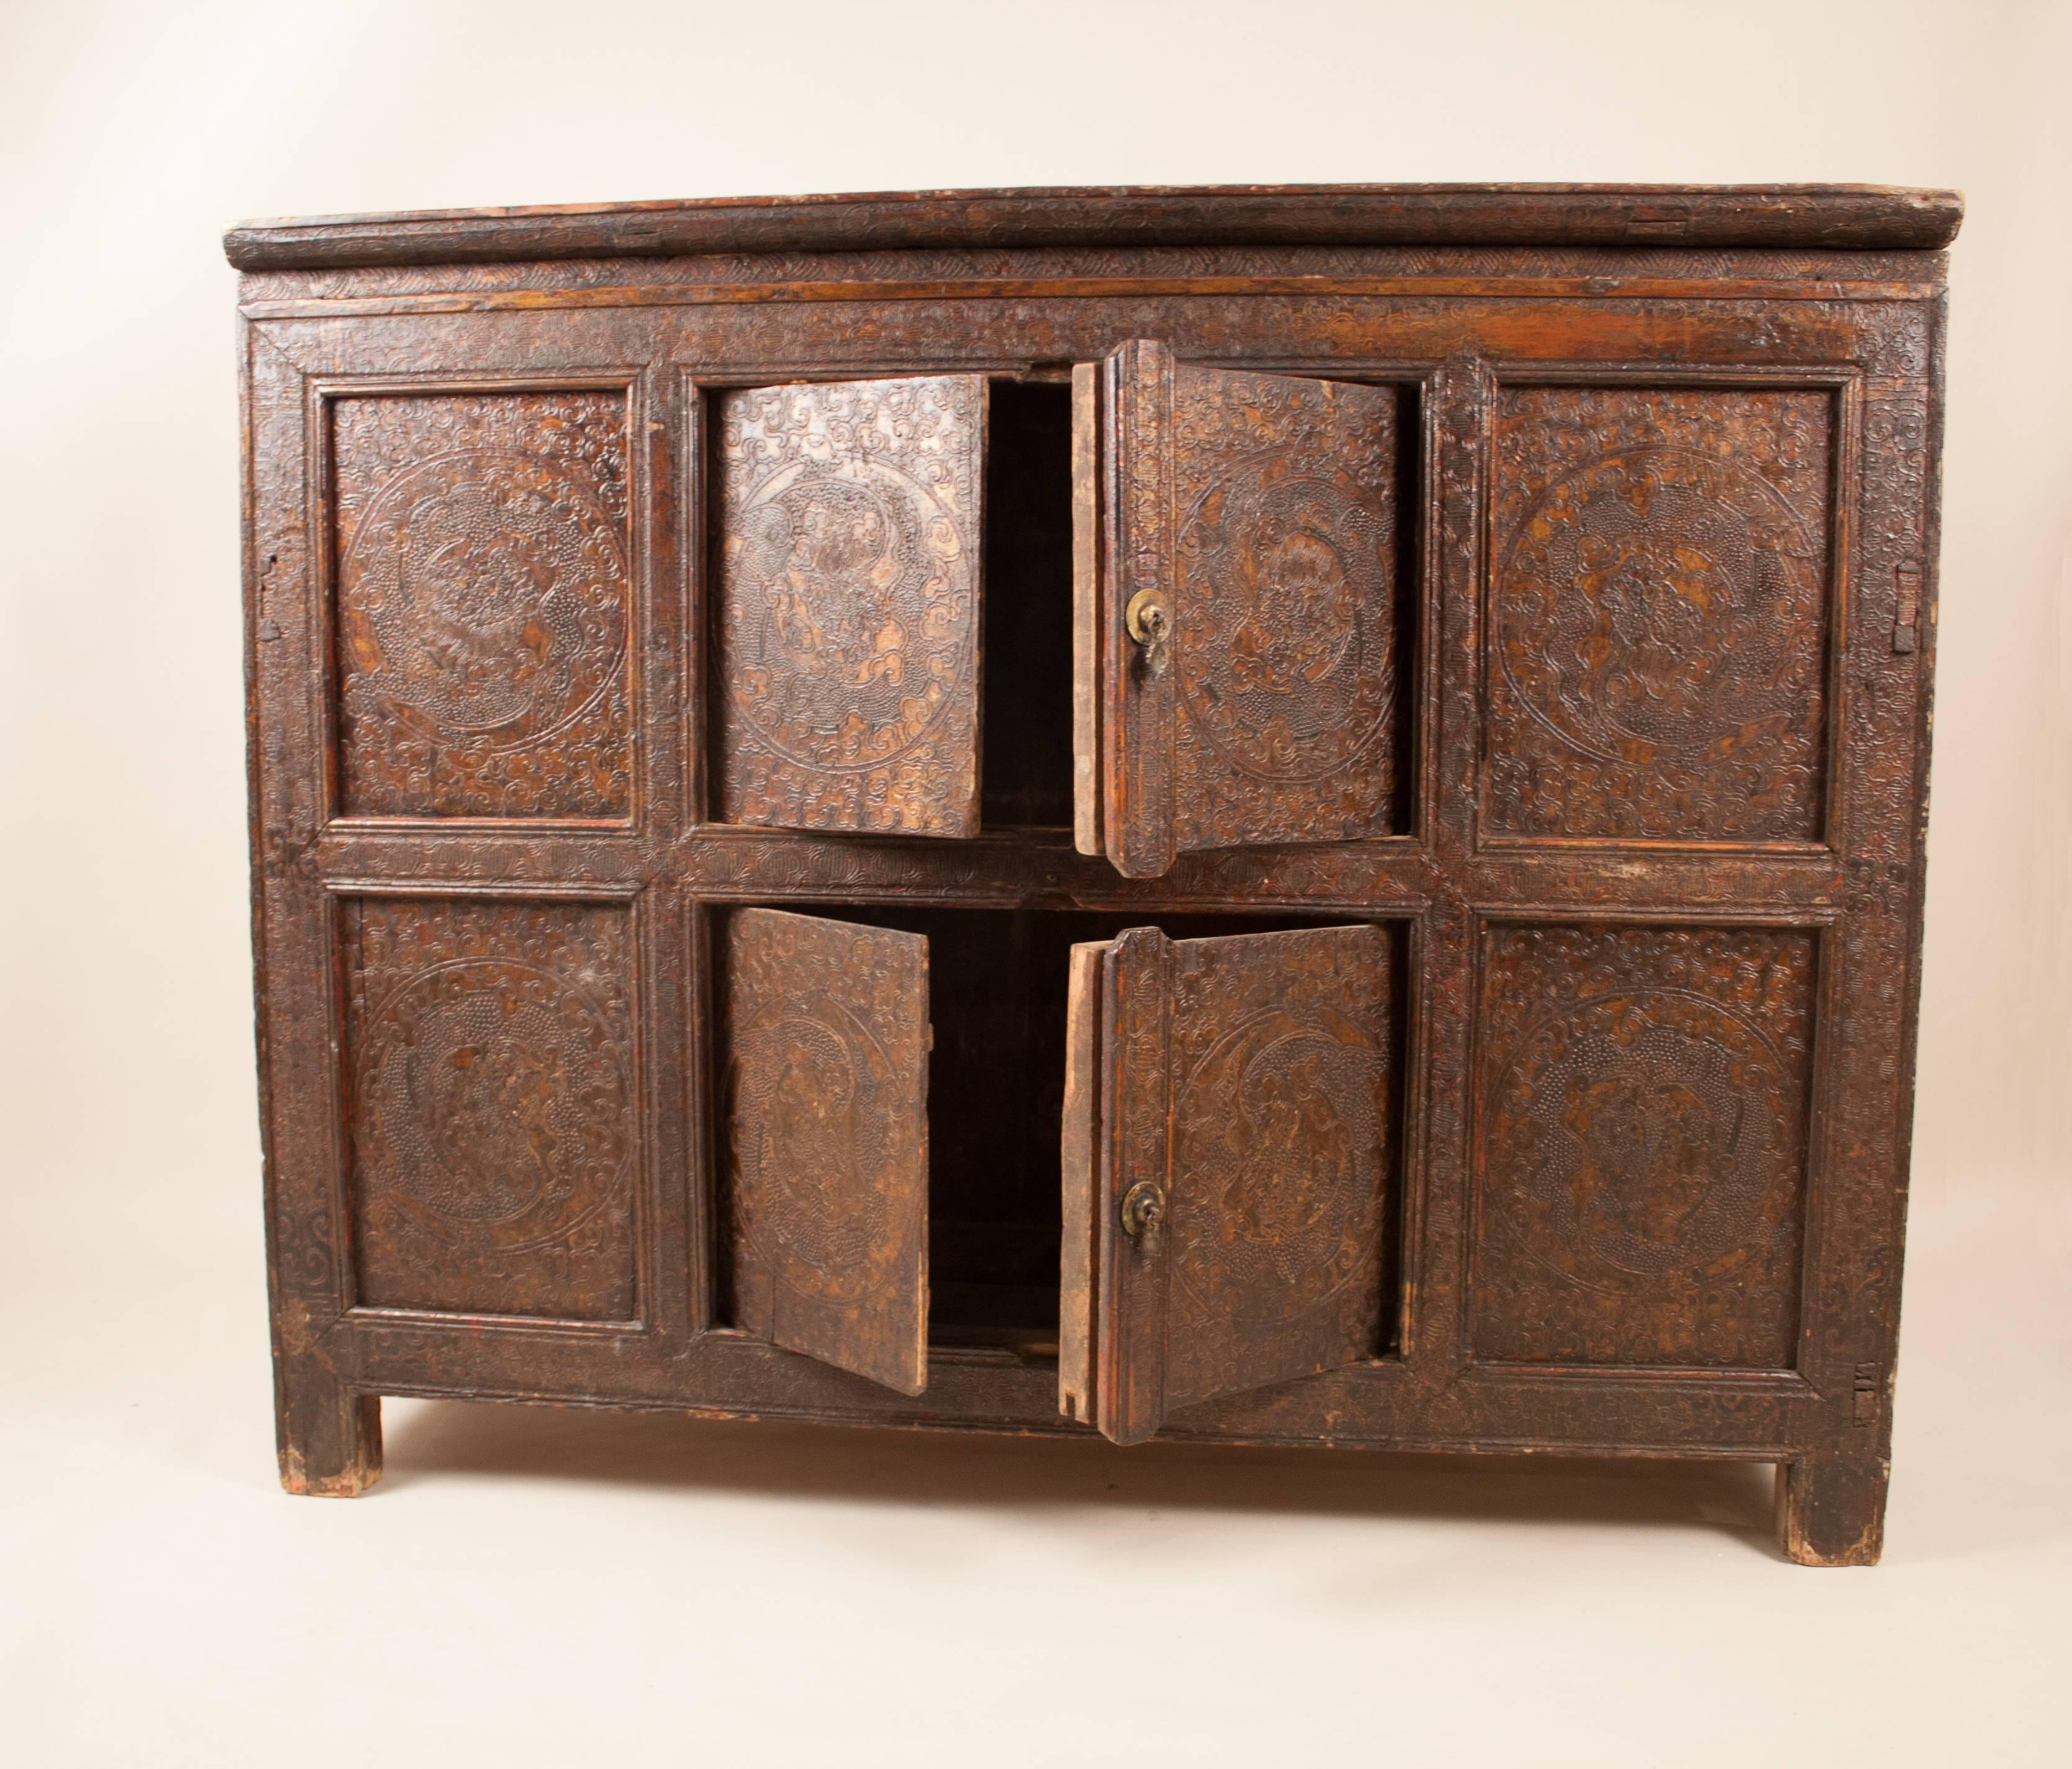 A Tibetan elm cabinet, circa 1920, with original textured paint in muted reddish tones. This Primitive piece features a circular dragon theme on each of the eight panels. The cabinet has mortise and tenon joinery, wooden door hinge pins and